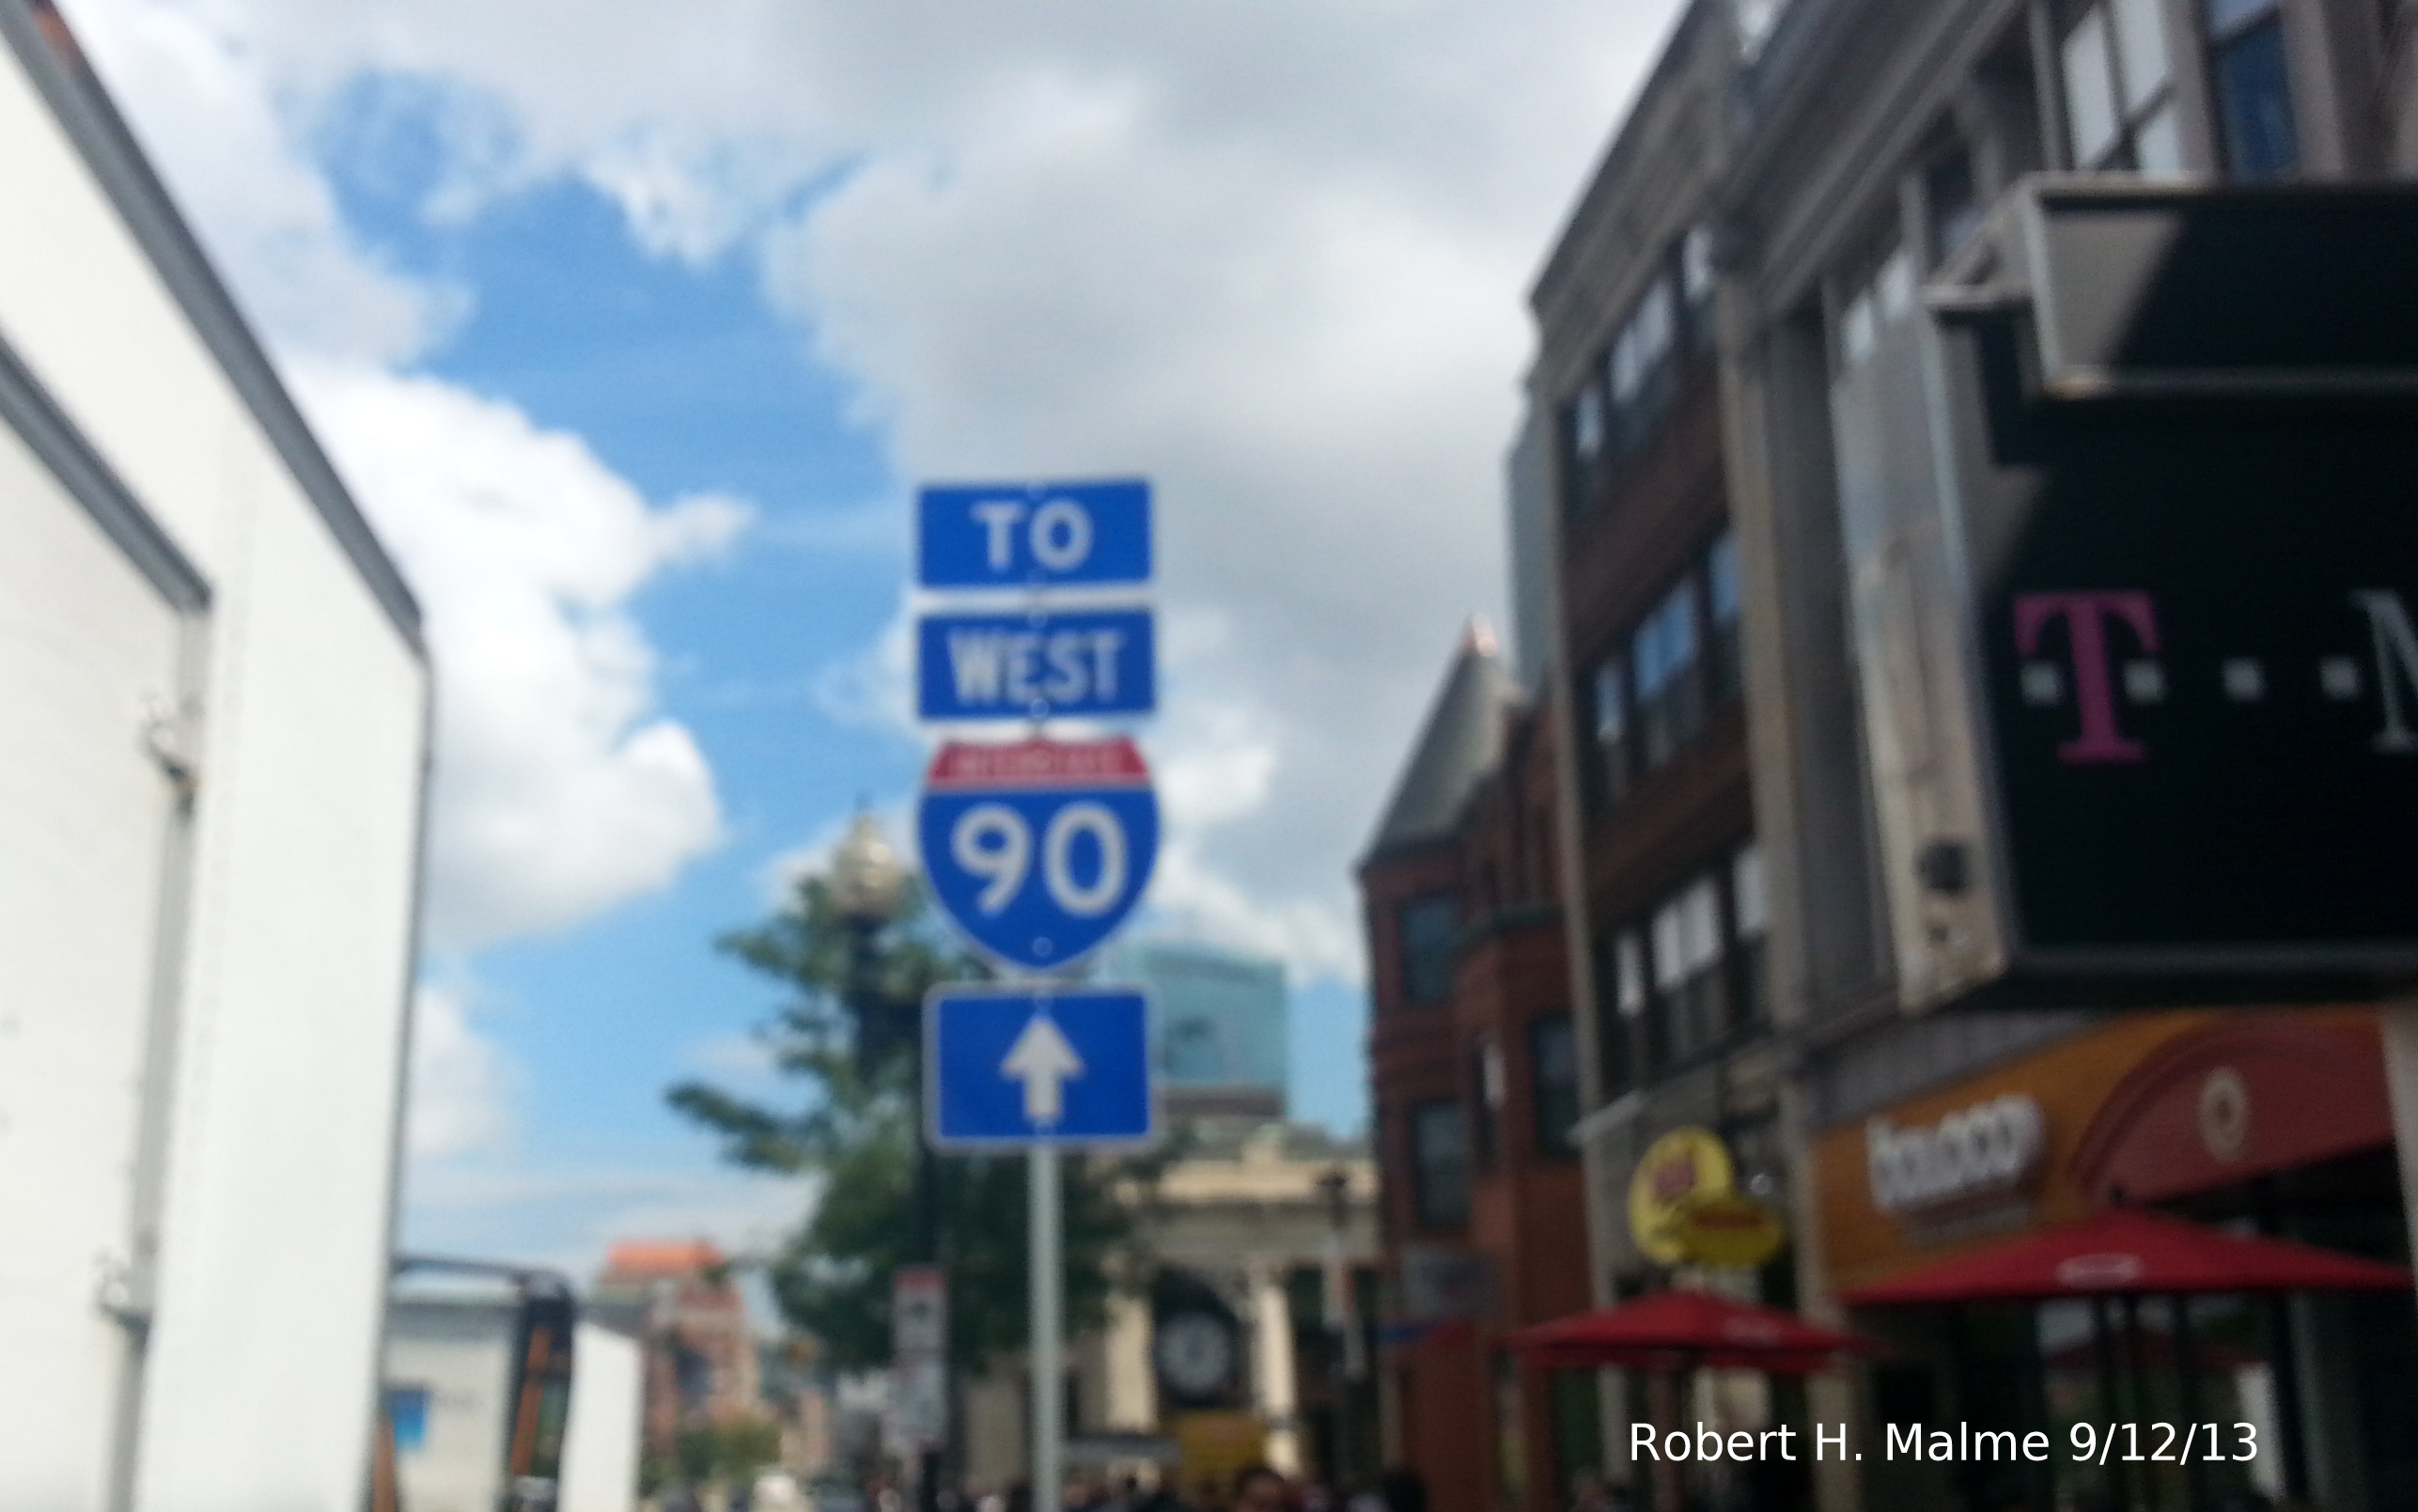 Photo of To I-90 West Sign on Boylston St Approaching Mass Ave in Boston, Sept. 2013